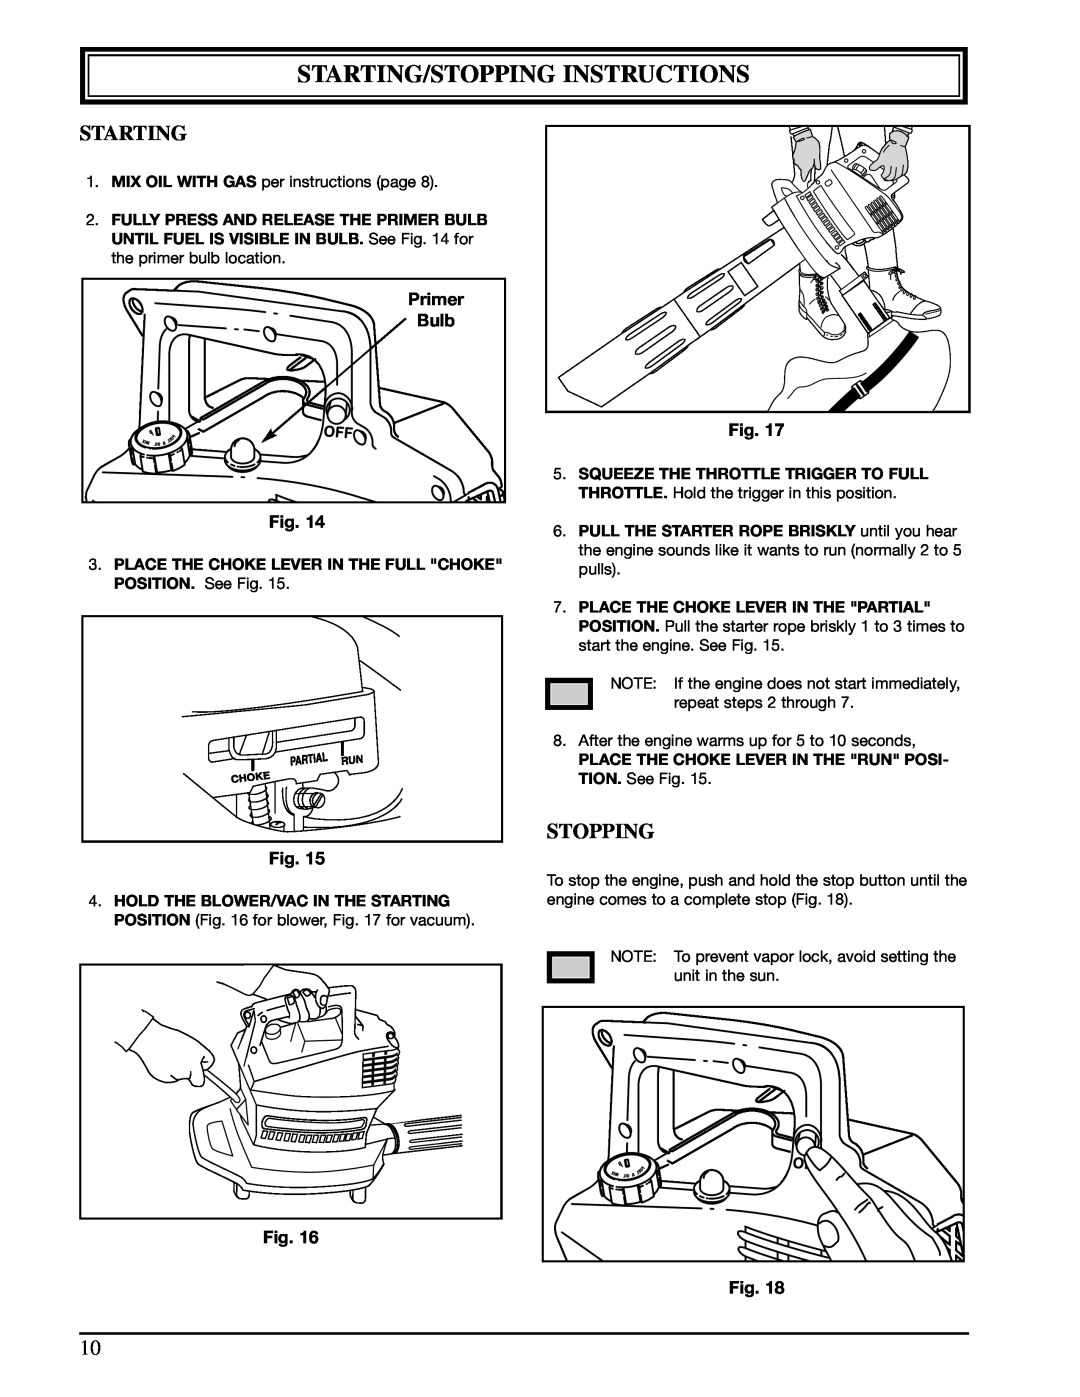 Ryobi 310r manual Starting/Stopping Instructions, Primer, Bulb, PLACE THE CHOKE LEVER IN THE FULL CHOKE POSITION. See Fig 